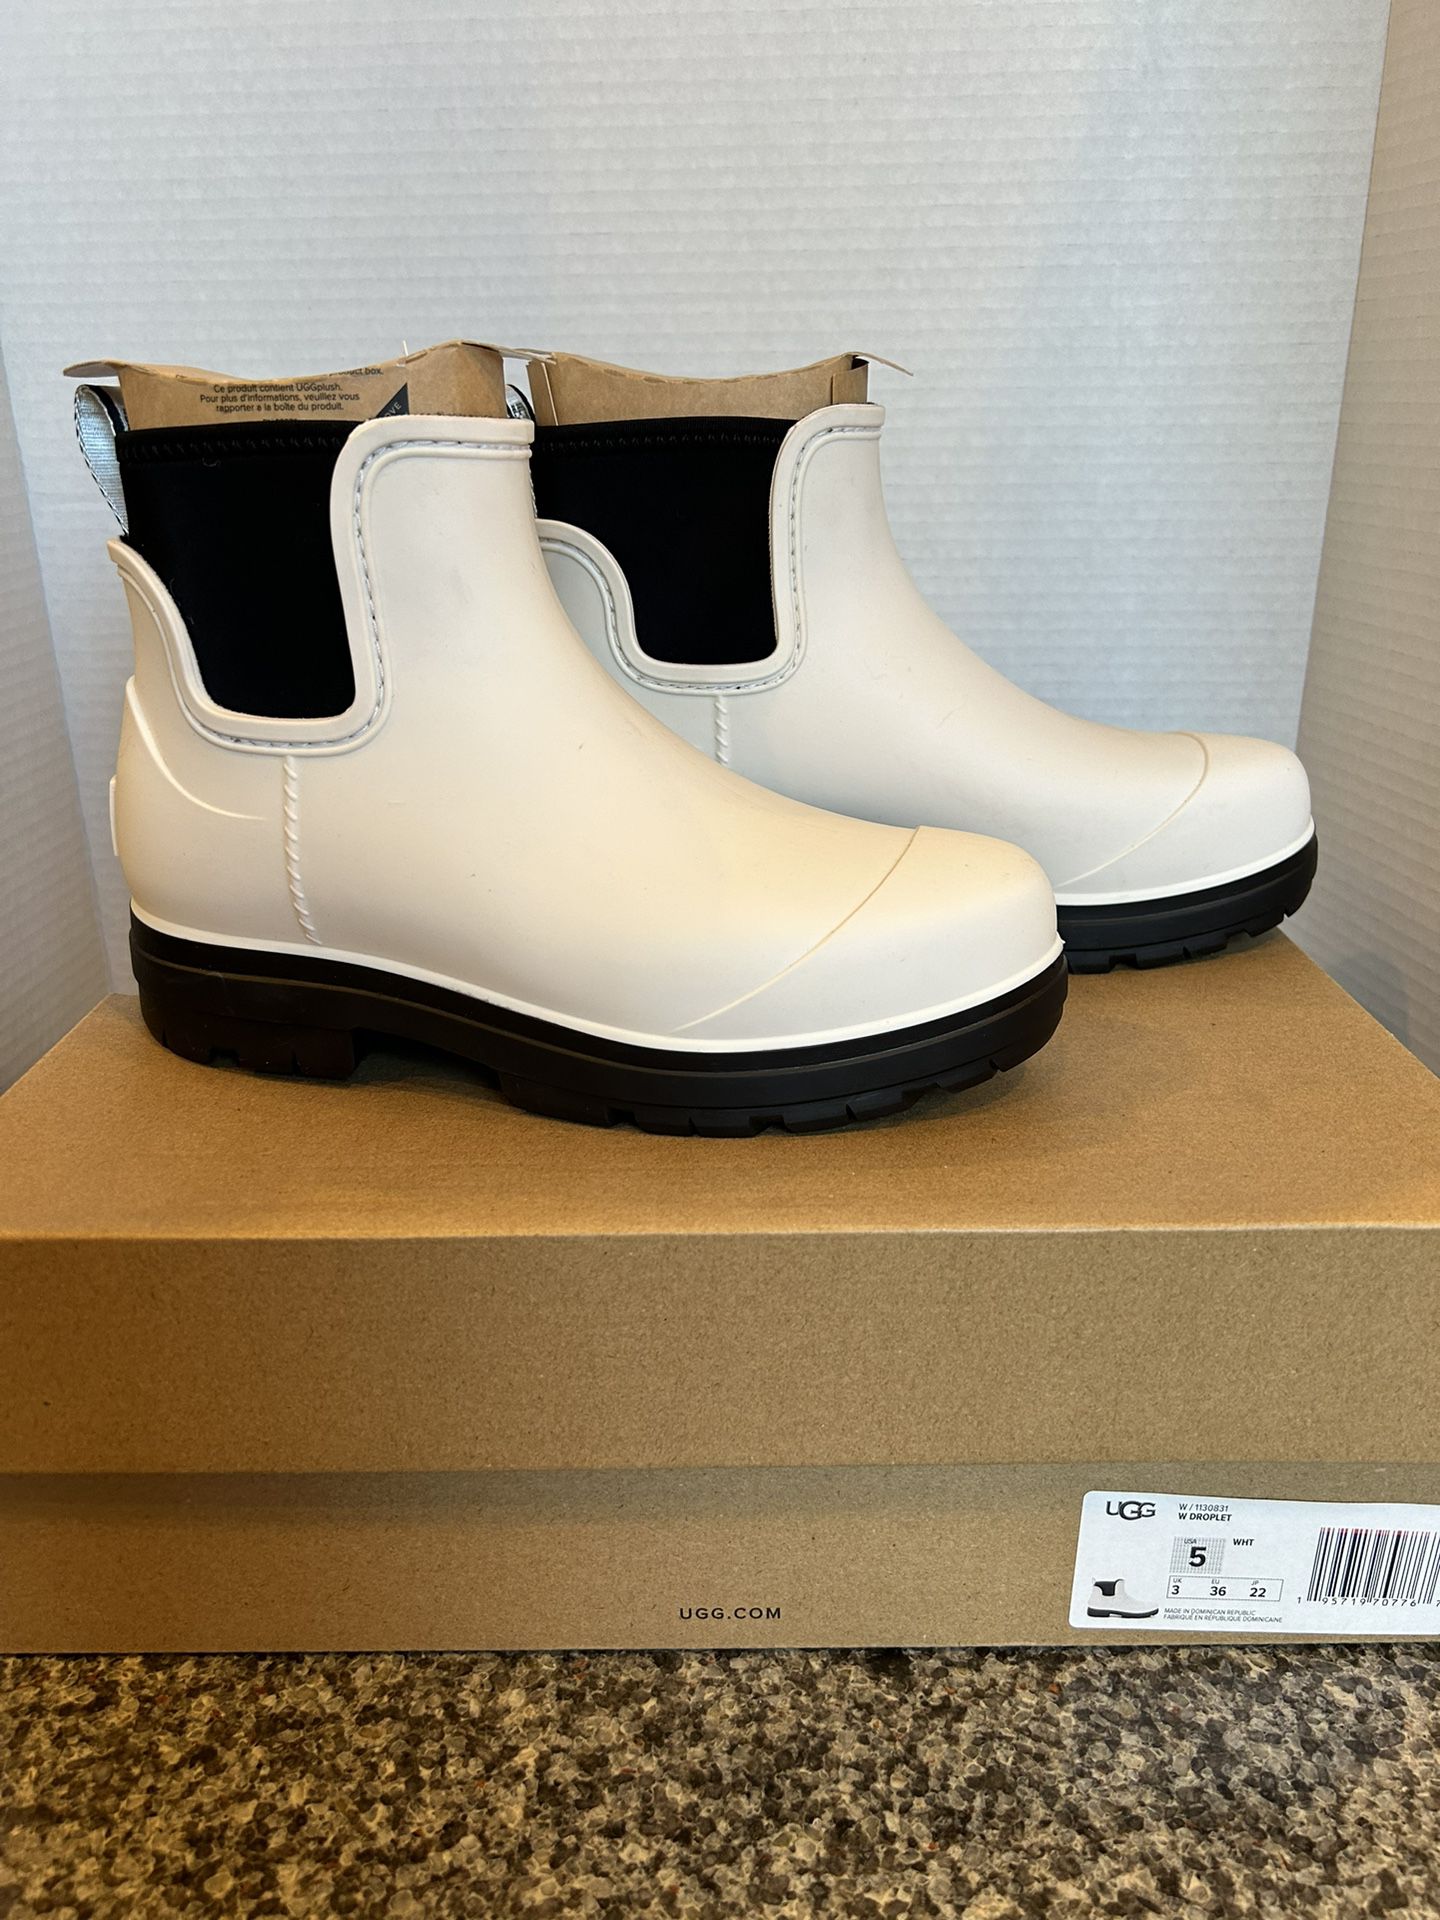 New Women’s UGG Boots Size 5